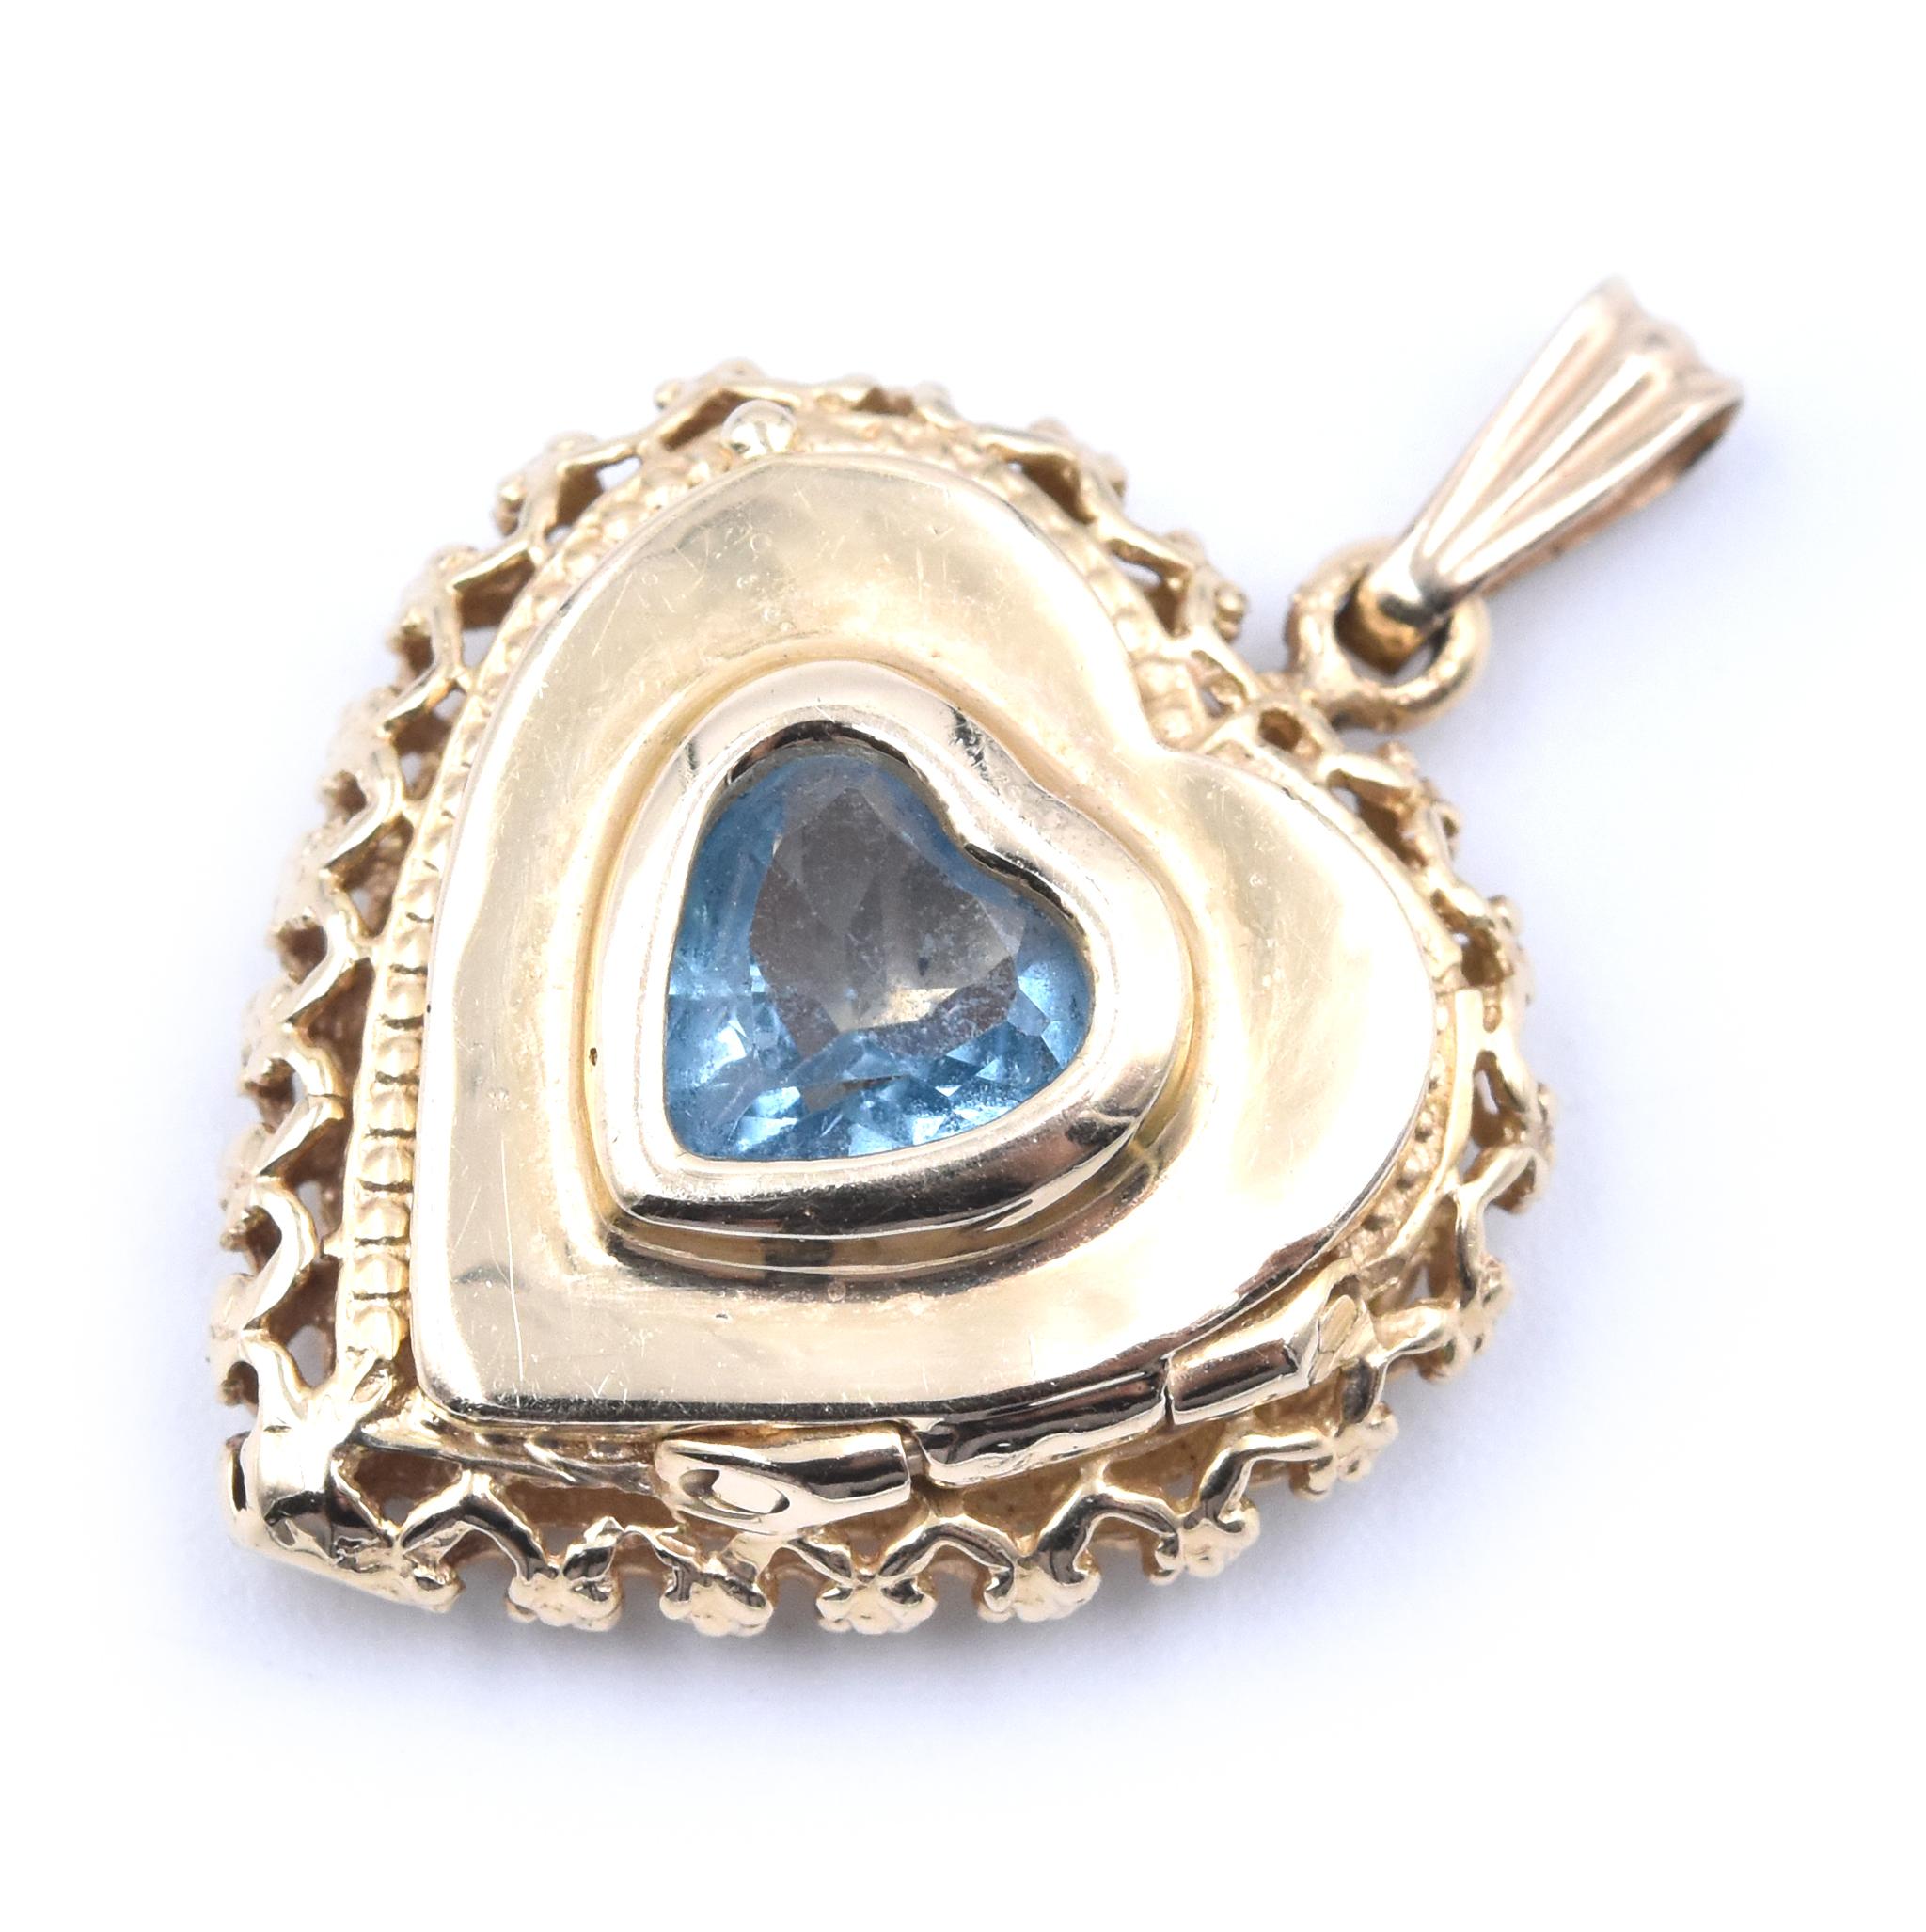 Designer: custom
Material: 14K yellow gold
Blue Topaz: 1 heart cut = .60ct
Dimensions: the pendant measures 28.5mm x 19.5mm 
Weight: 4.20 grams
